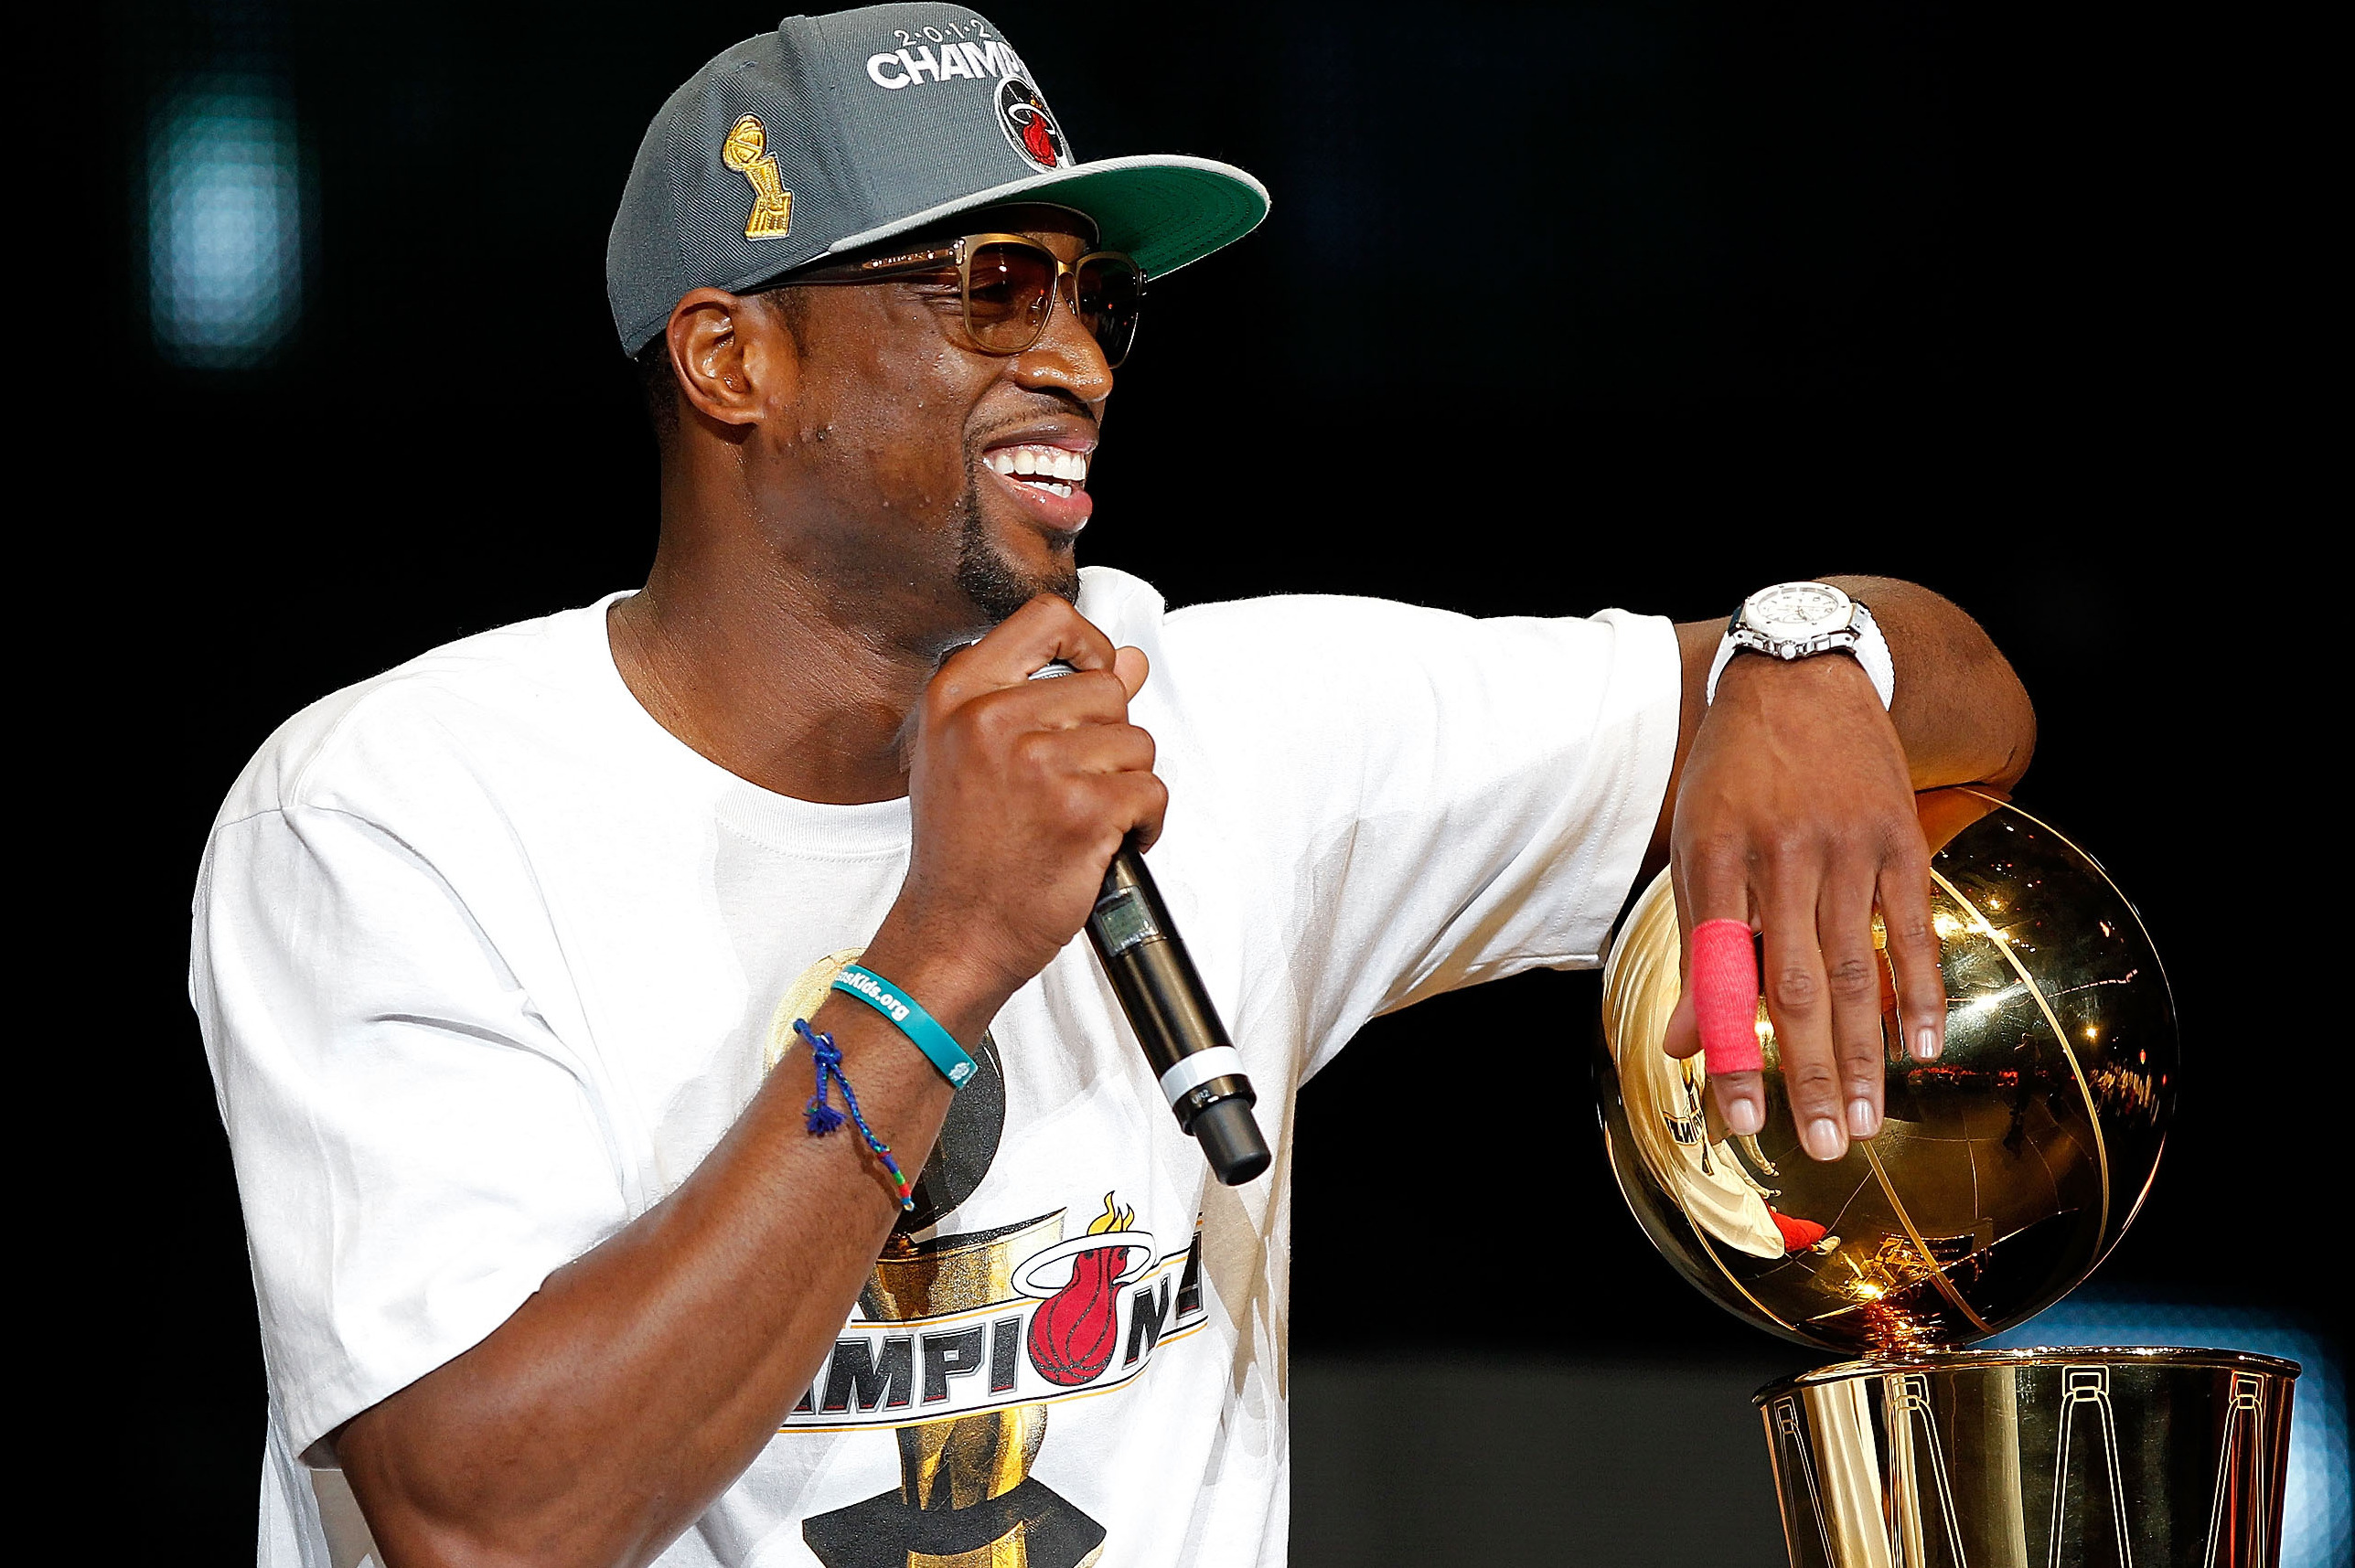 Heat Repeat: Epic 2012-13 Finals end with another championship for Miami  Heat